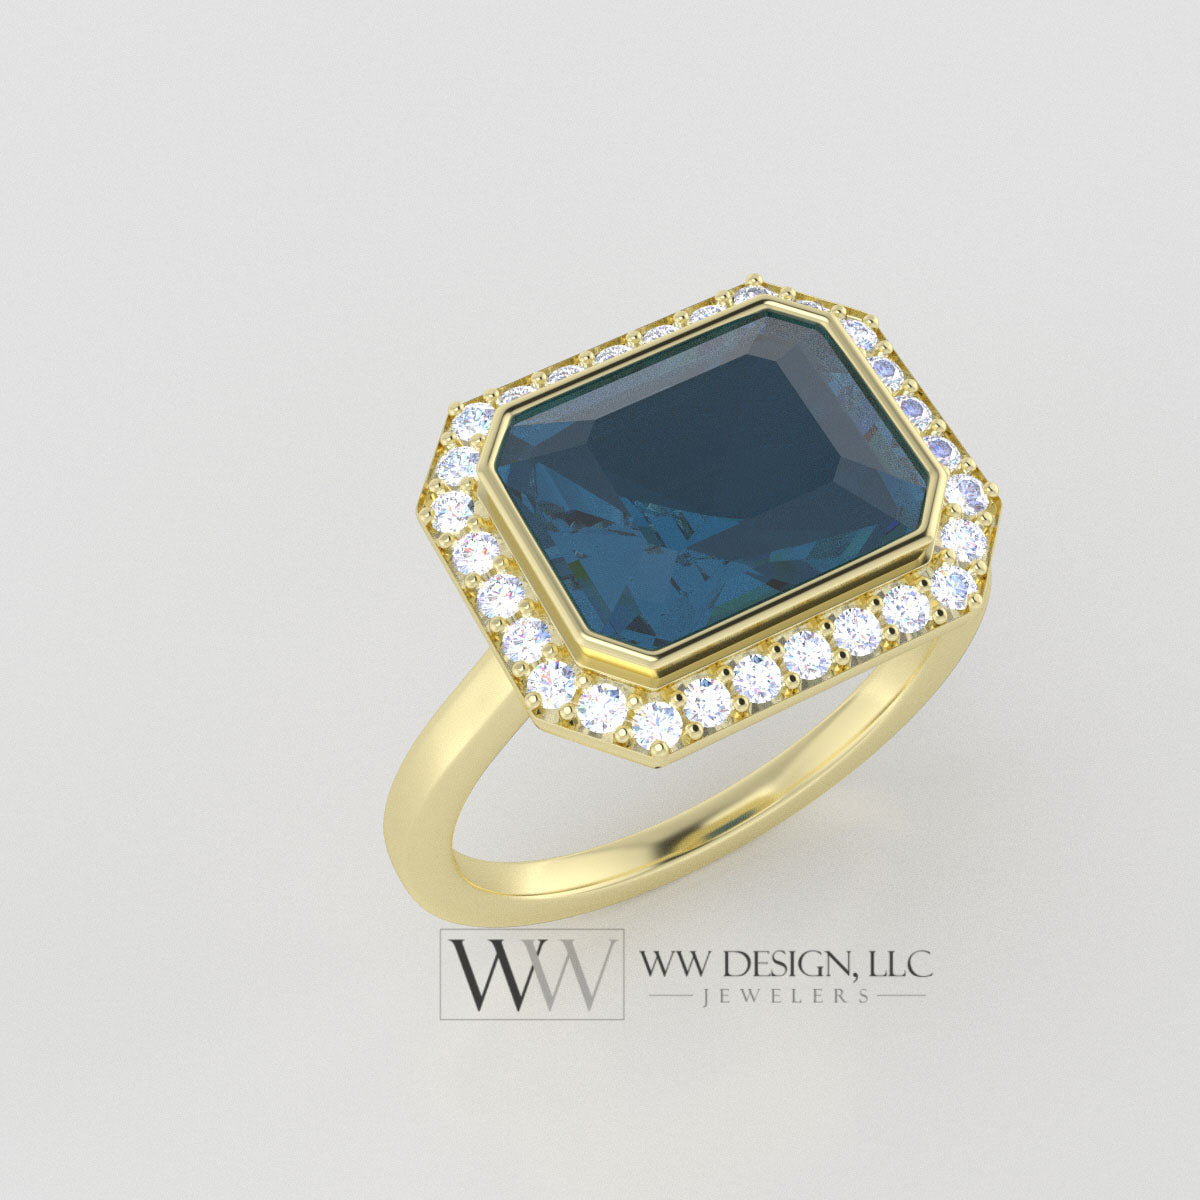 Genuine 4.25ct London Blue Topaz East West Emerald Shaped Ring with 0.28ctw Diamond Halo - 14k 18k Gold (Y, R,W) Platinum